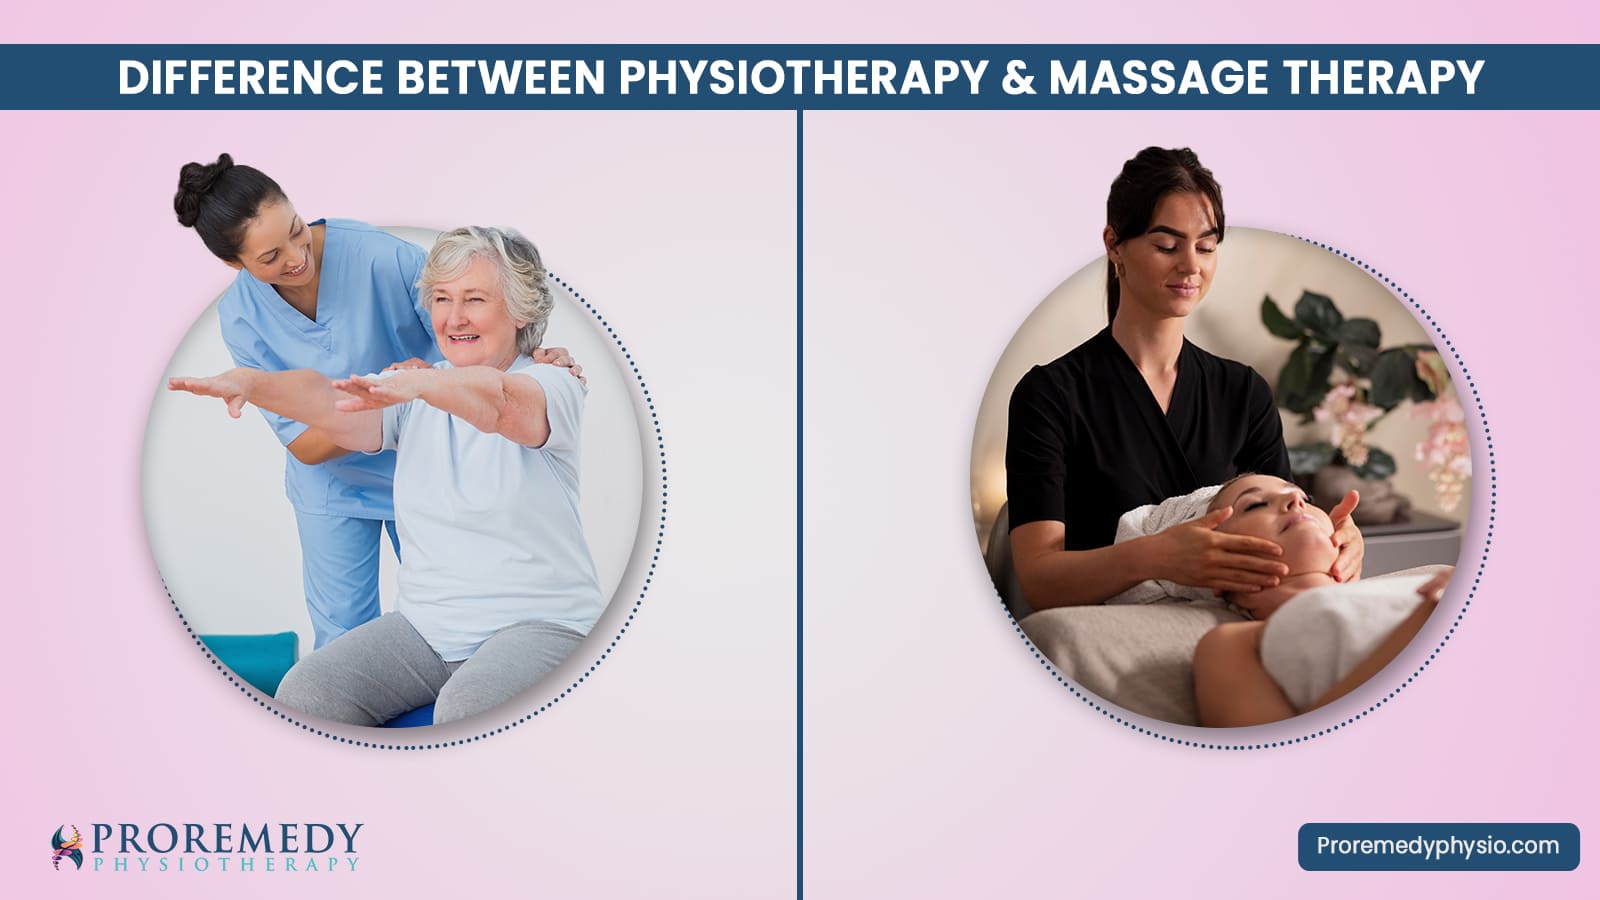 physiotherapy v/s massage therapy